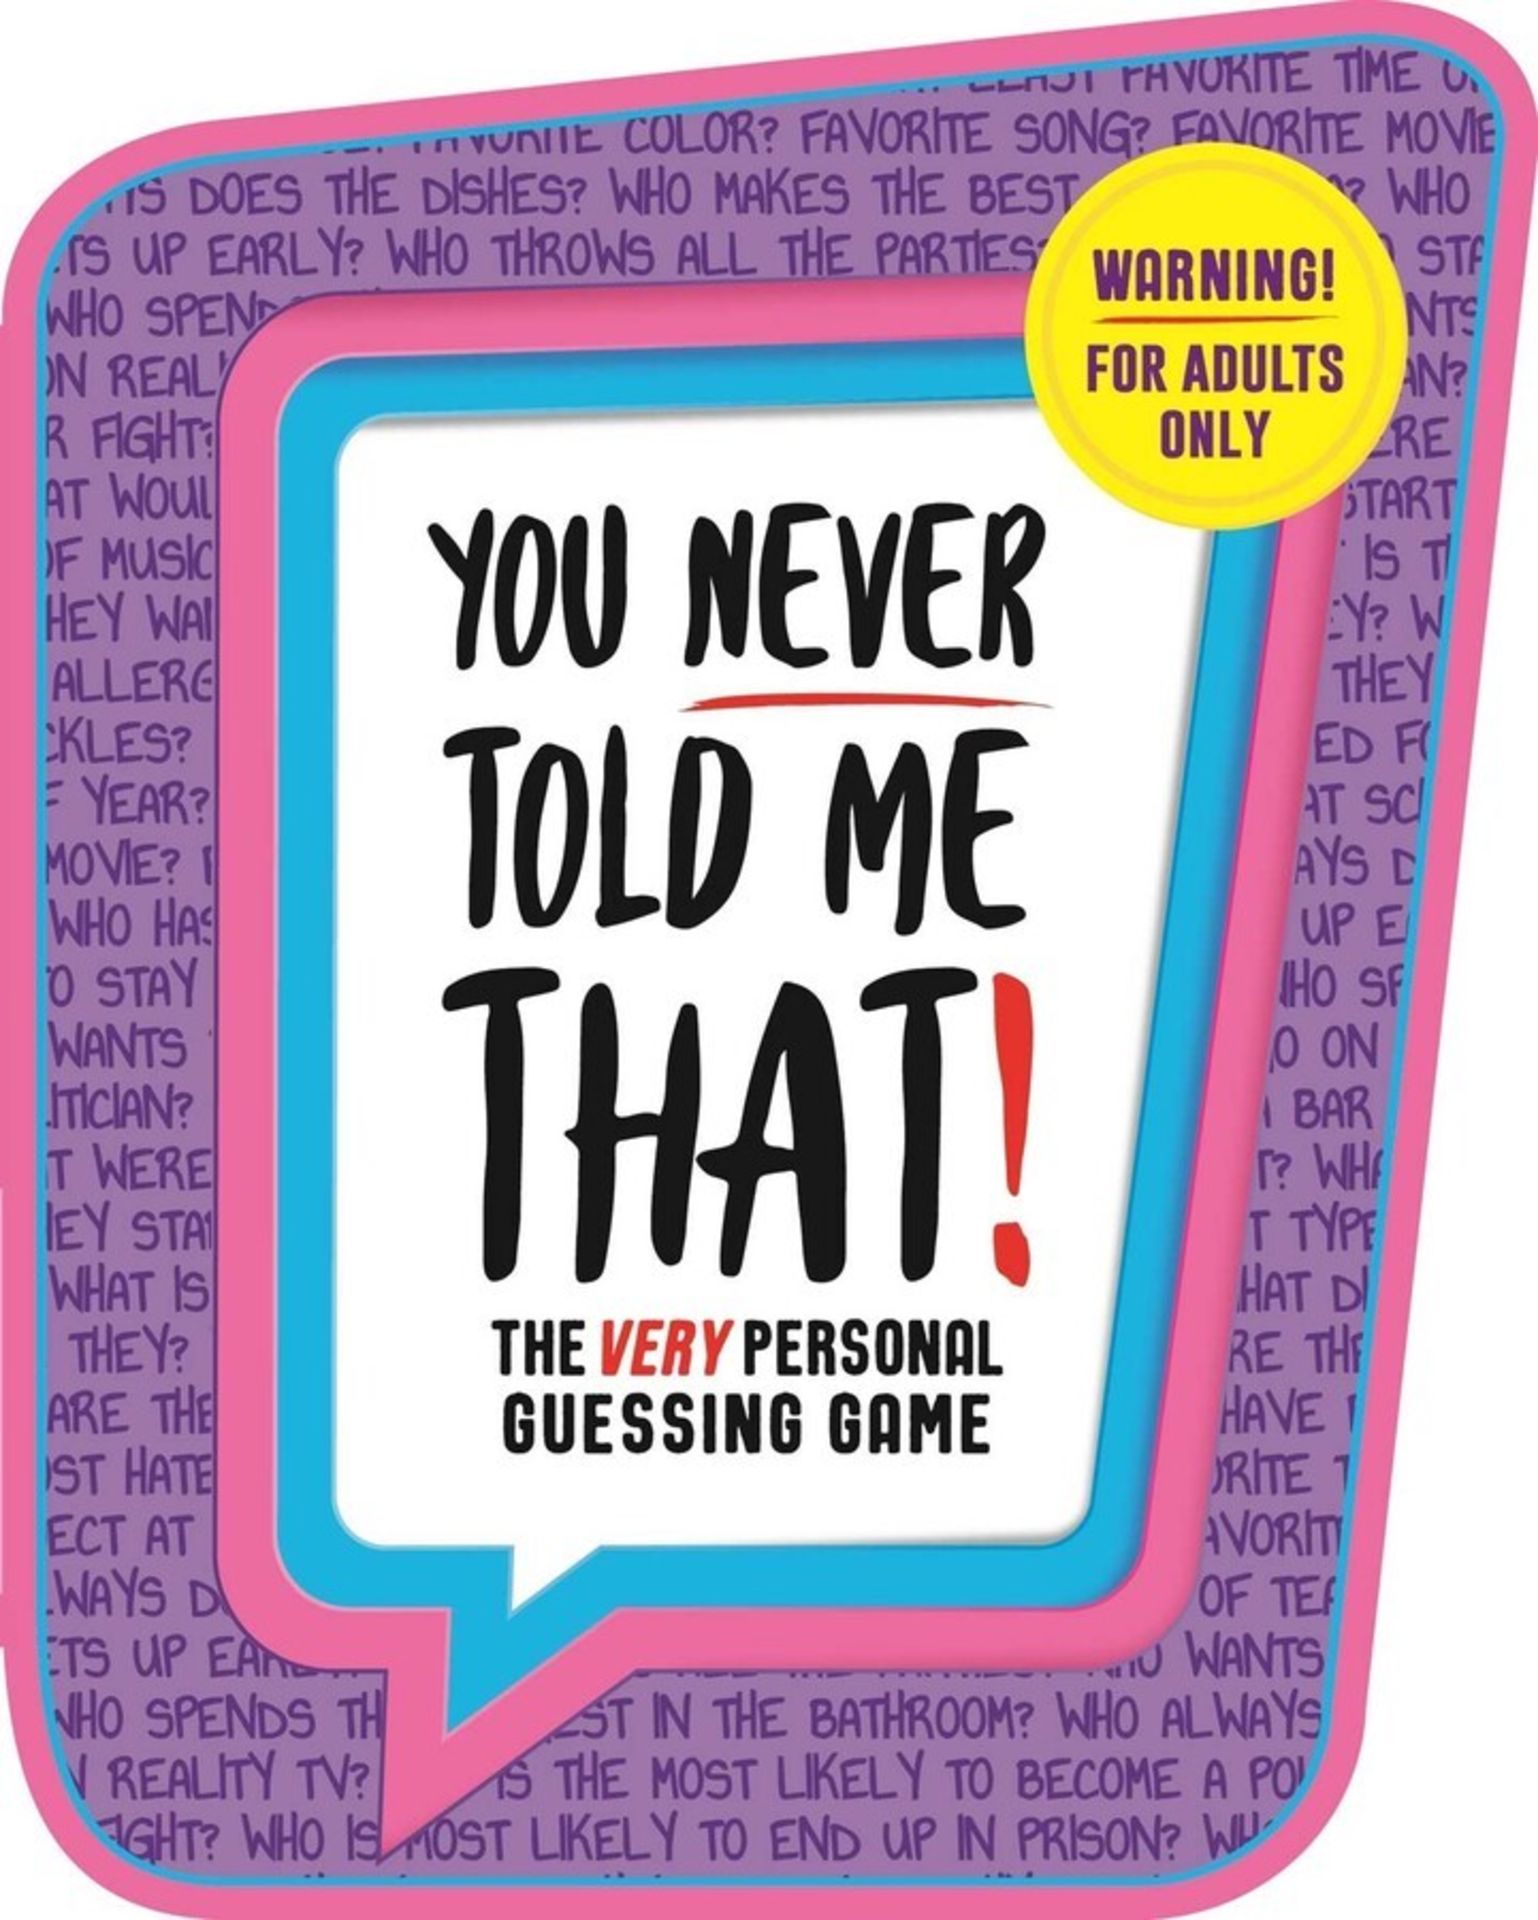 New You Never Told Me That - The Very Personal Guessing Game